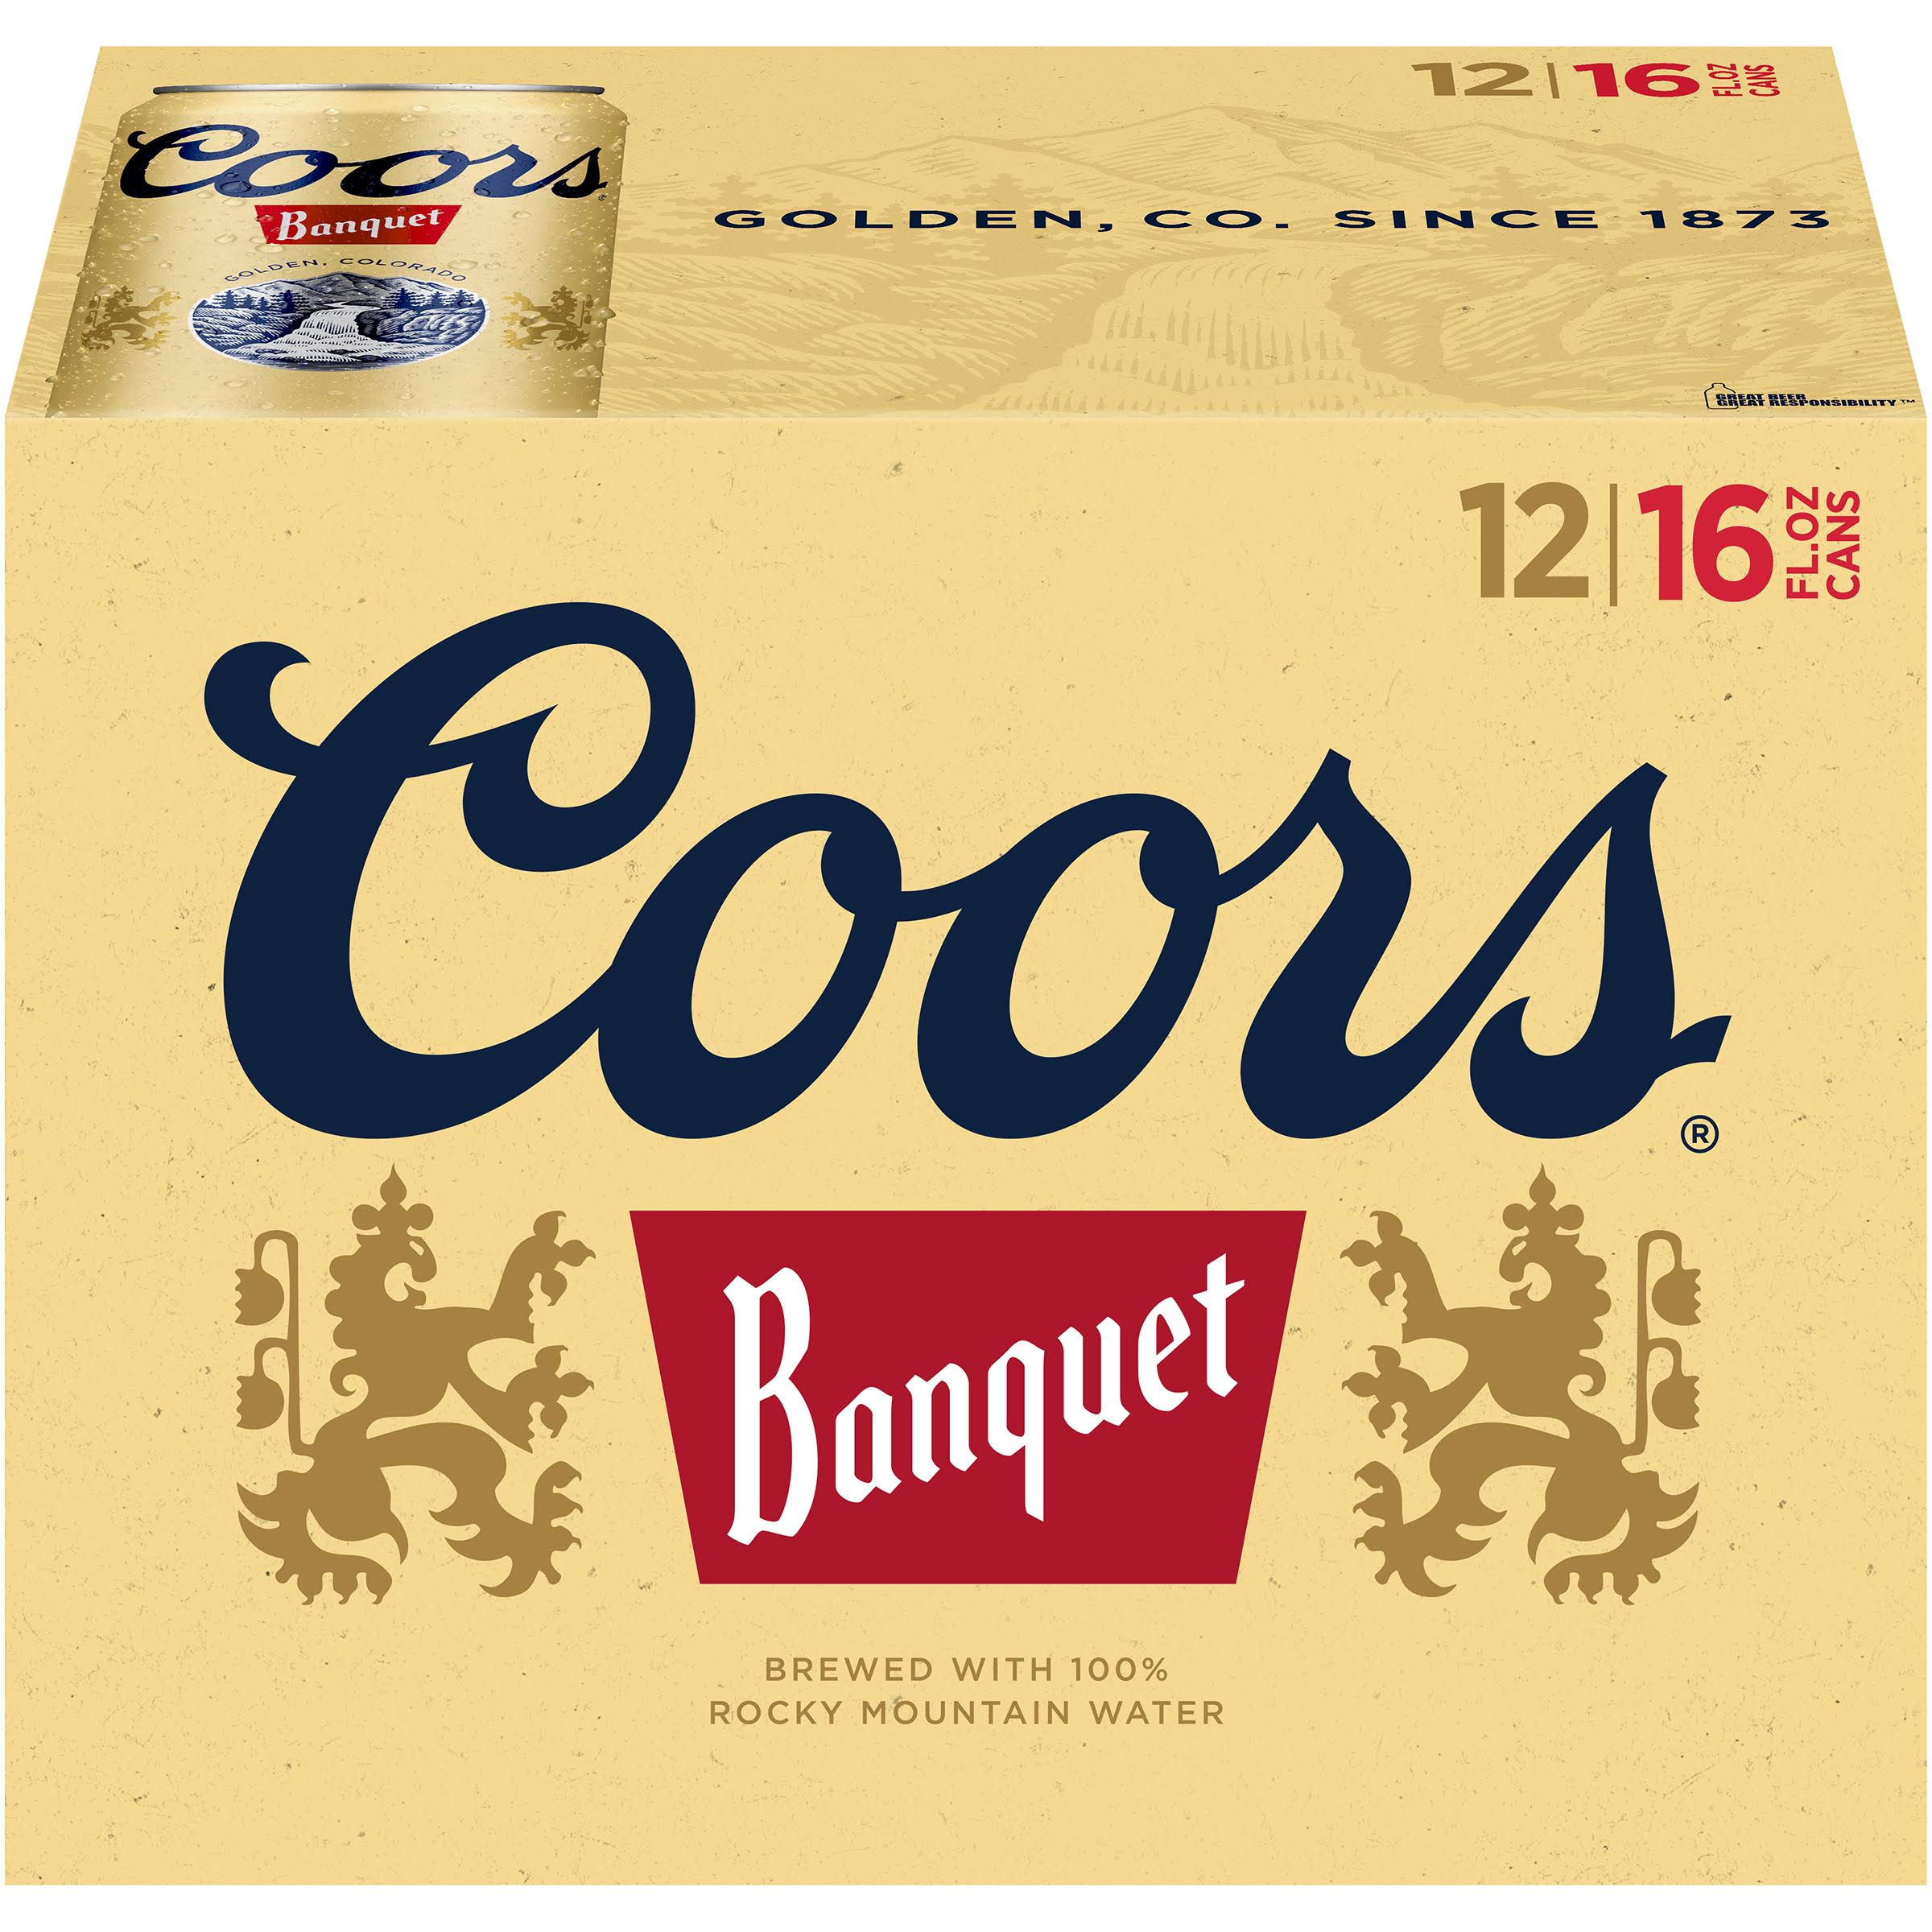 Coors Beer, Banquet - 12 pack, 16 fl oz cans